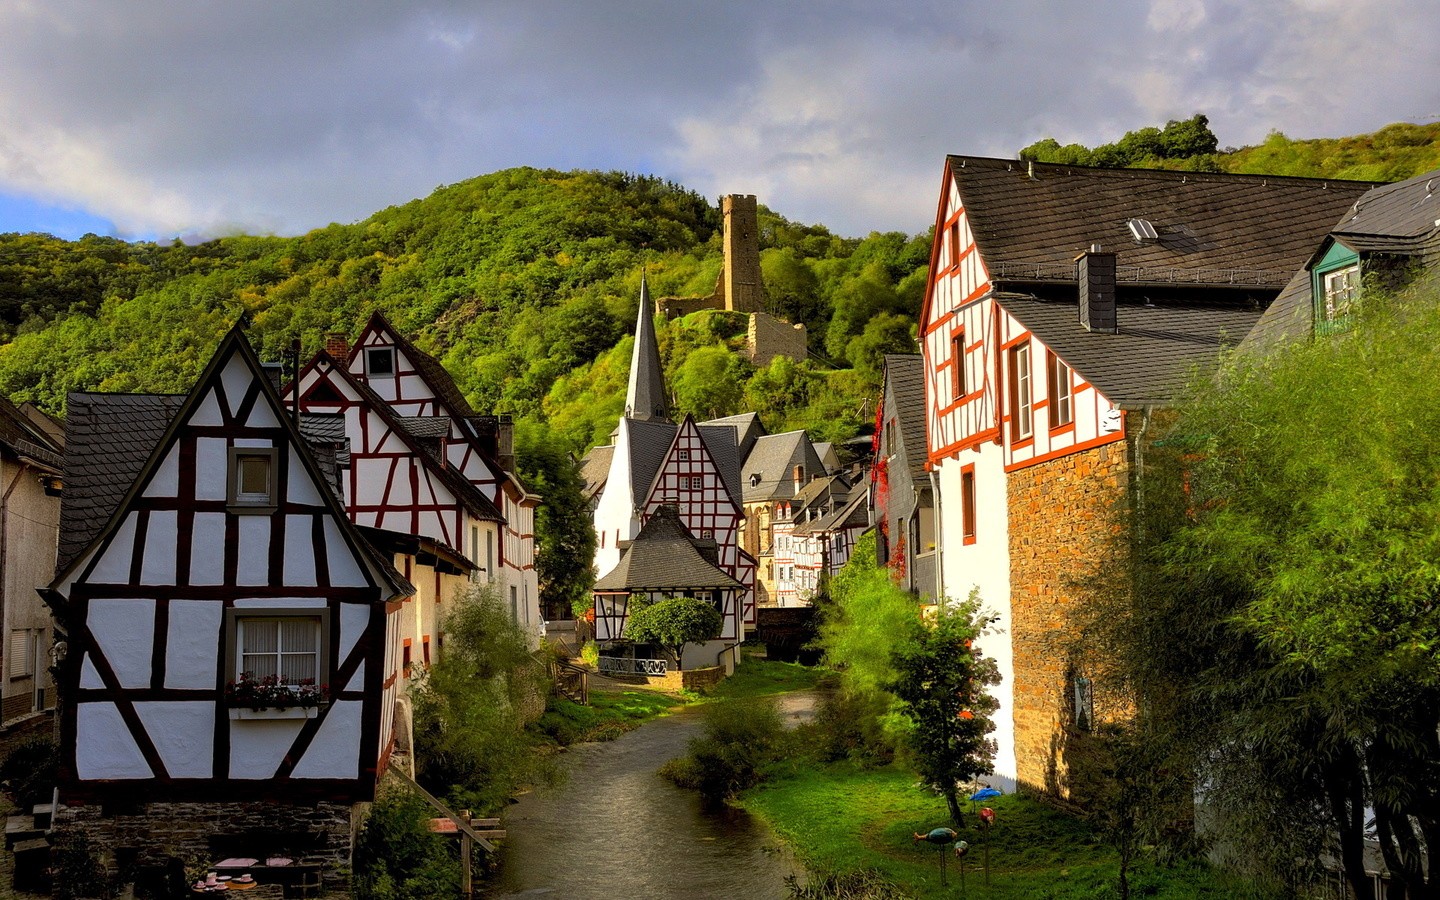 General 1440x900 architecture building old building water Germany village house stream trees nature landscape forest tower hills ruins clouds town vibrant idyllic